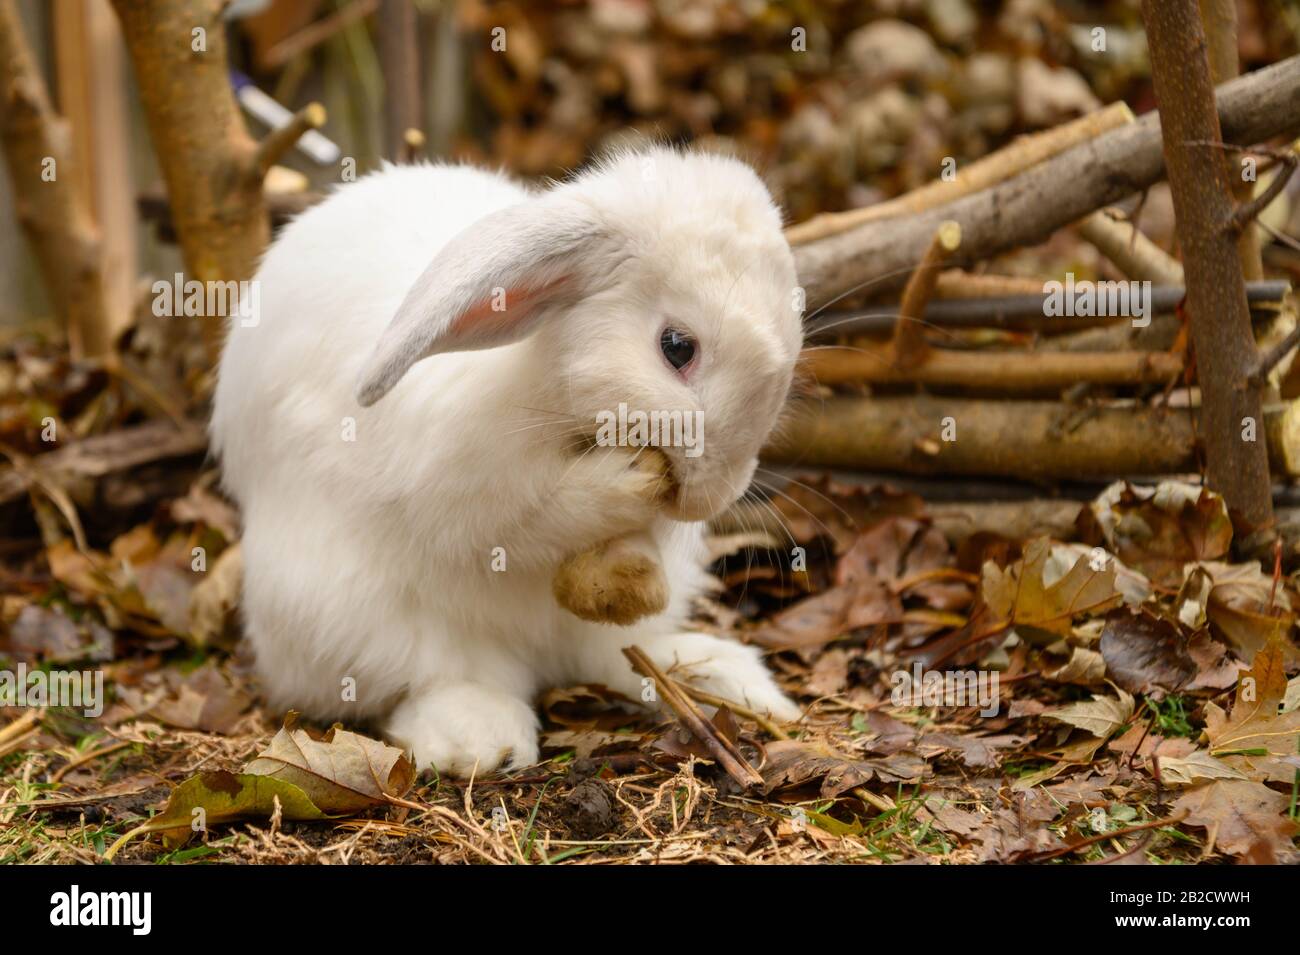 A white Holland lop rabbit stands on a ground. Stock Photo